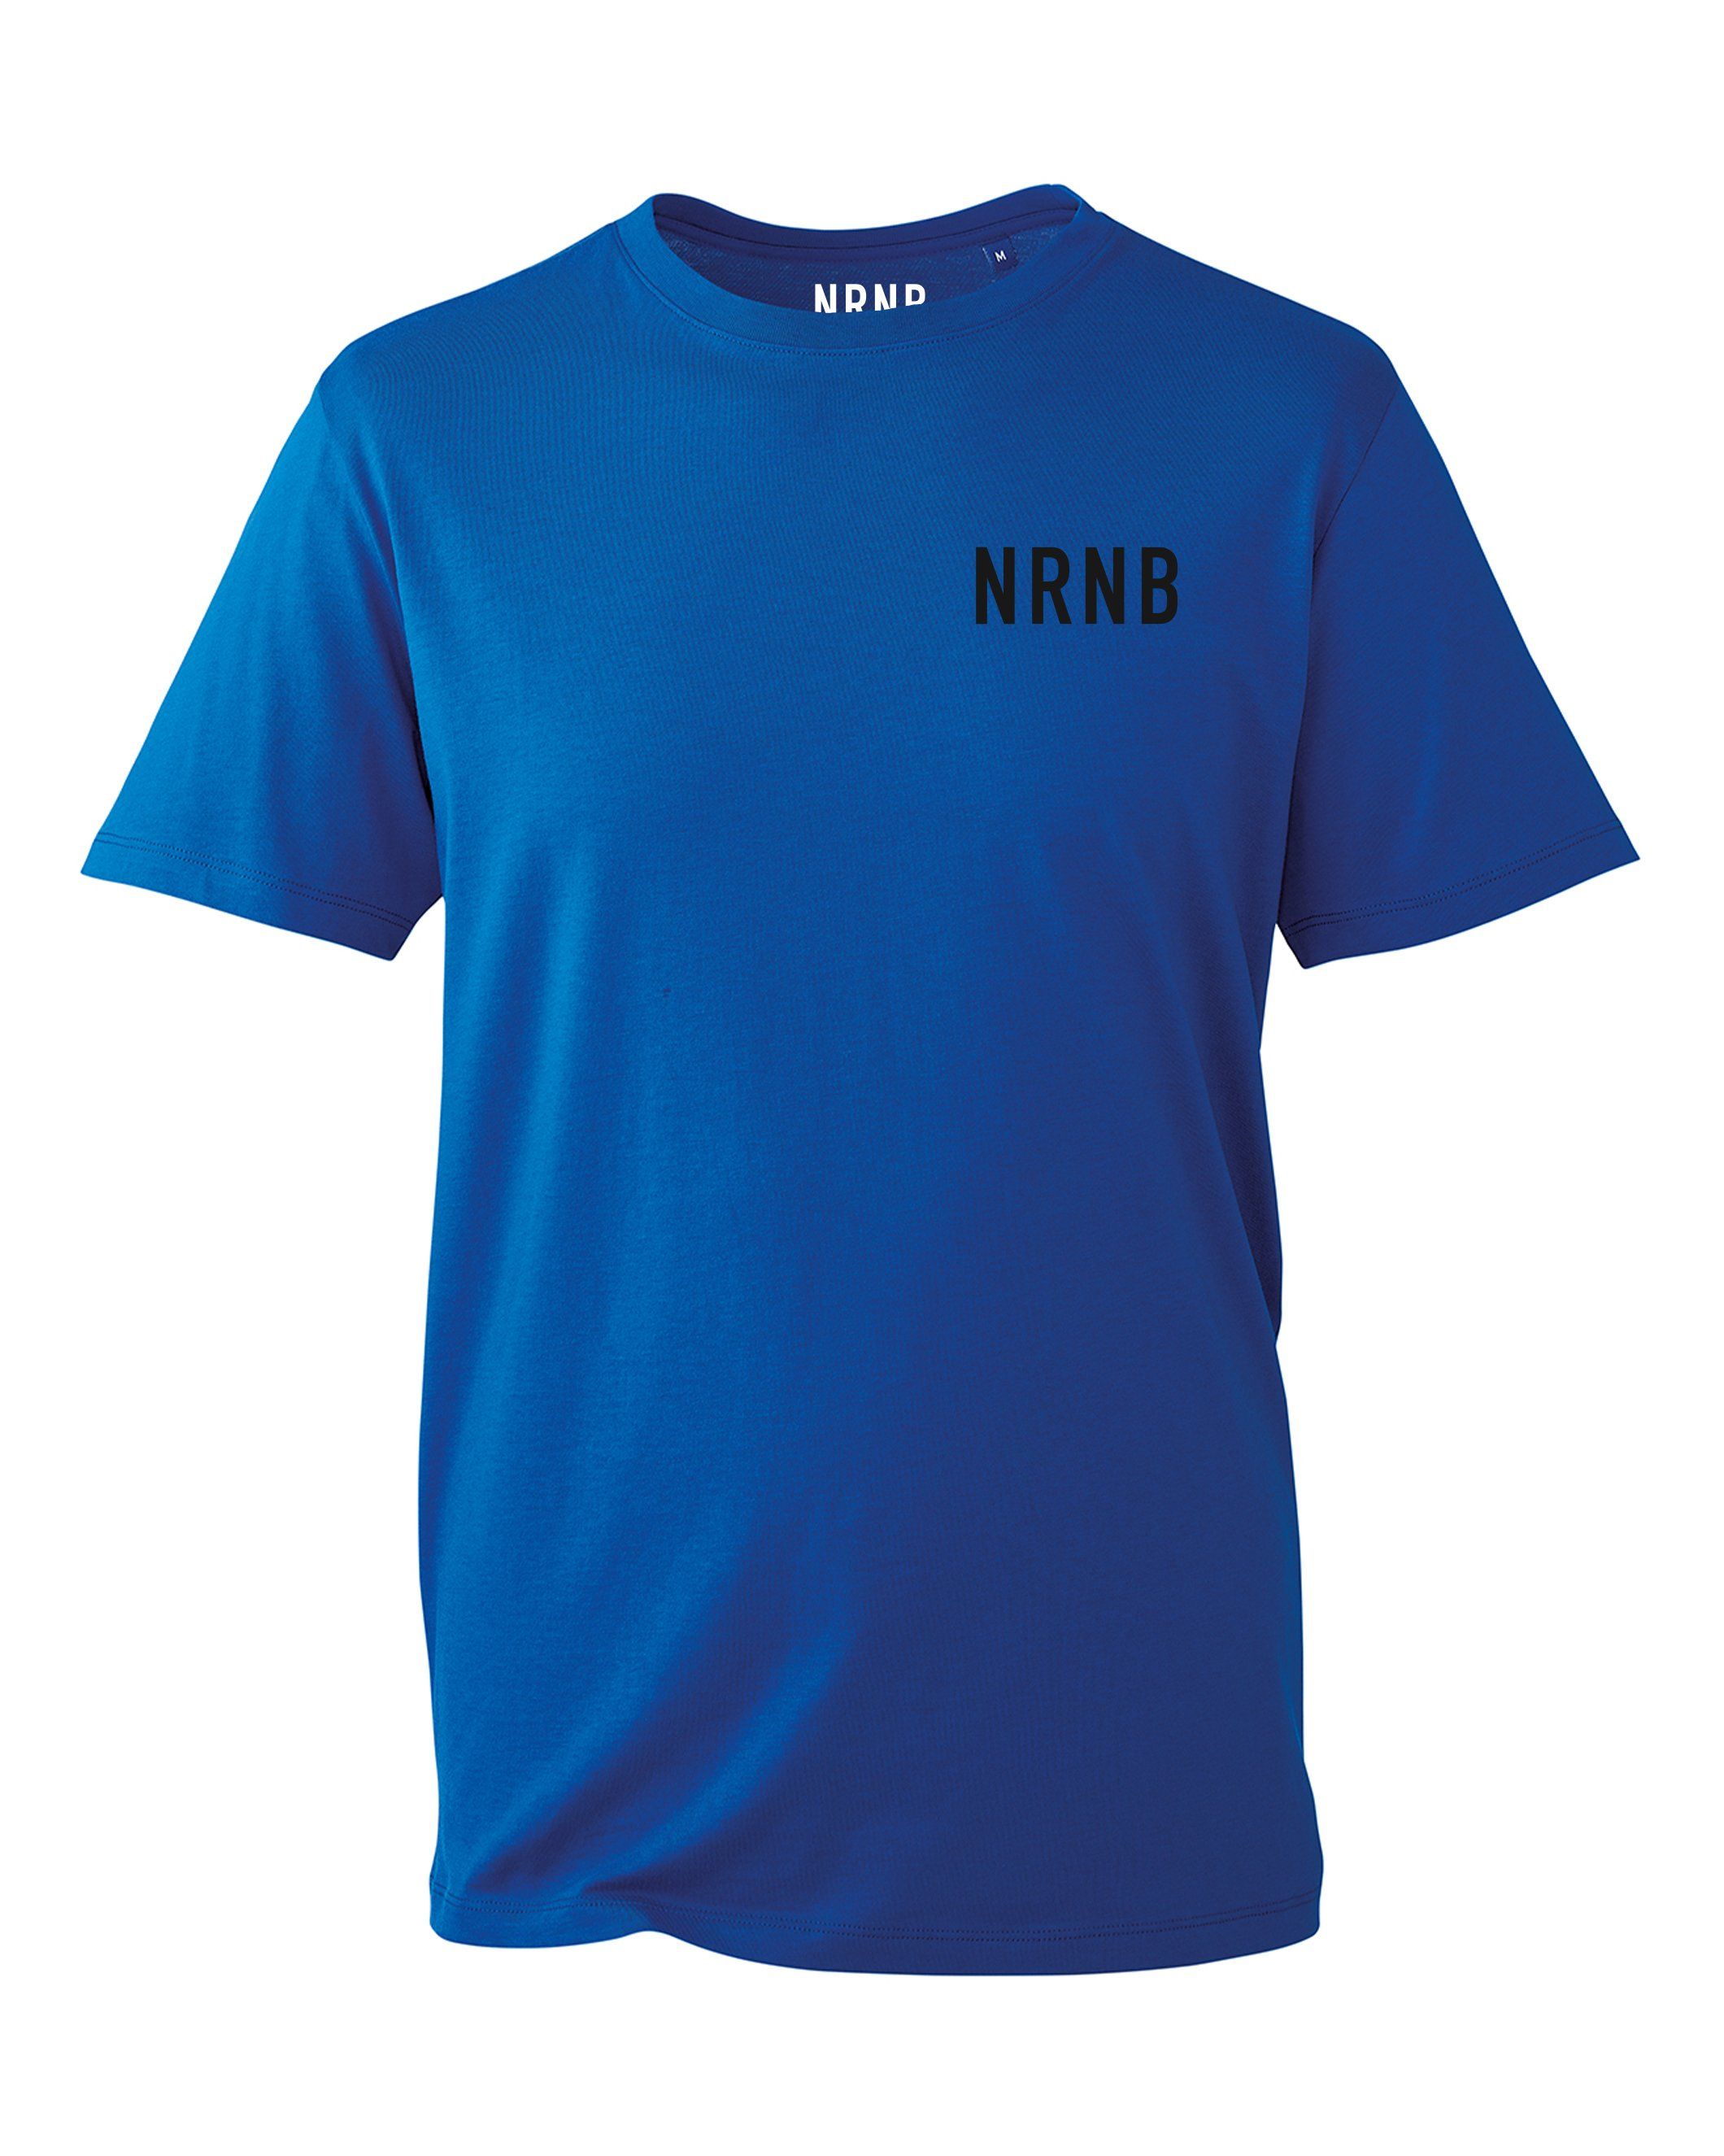 Our entry tee has an incredibly soft-feel finish and the ultimate ribbed crew neck. All with chain stitch detailing on the shoulders and nape of the nec,. Wear it to perfection. Fashion fit.  Soft-feel finish.  Ribbed crew neck.  100% Organic cotton. 145gsm. S-34/36, M-38/40, L-42/44, XL-46/48, 2XL-50/52, 3XL-54/87